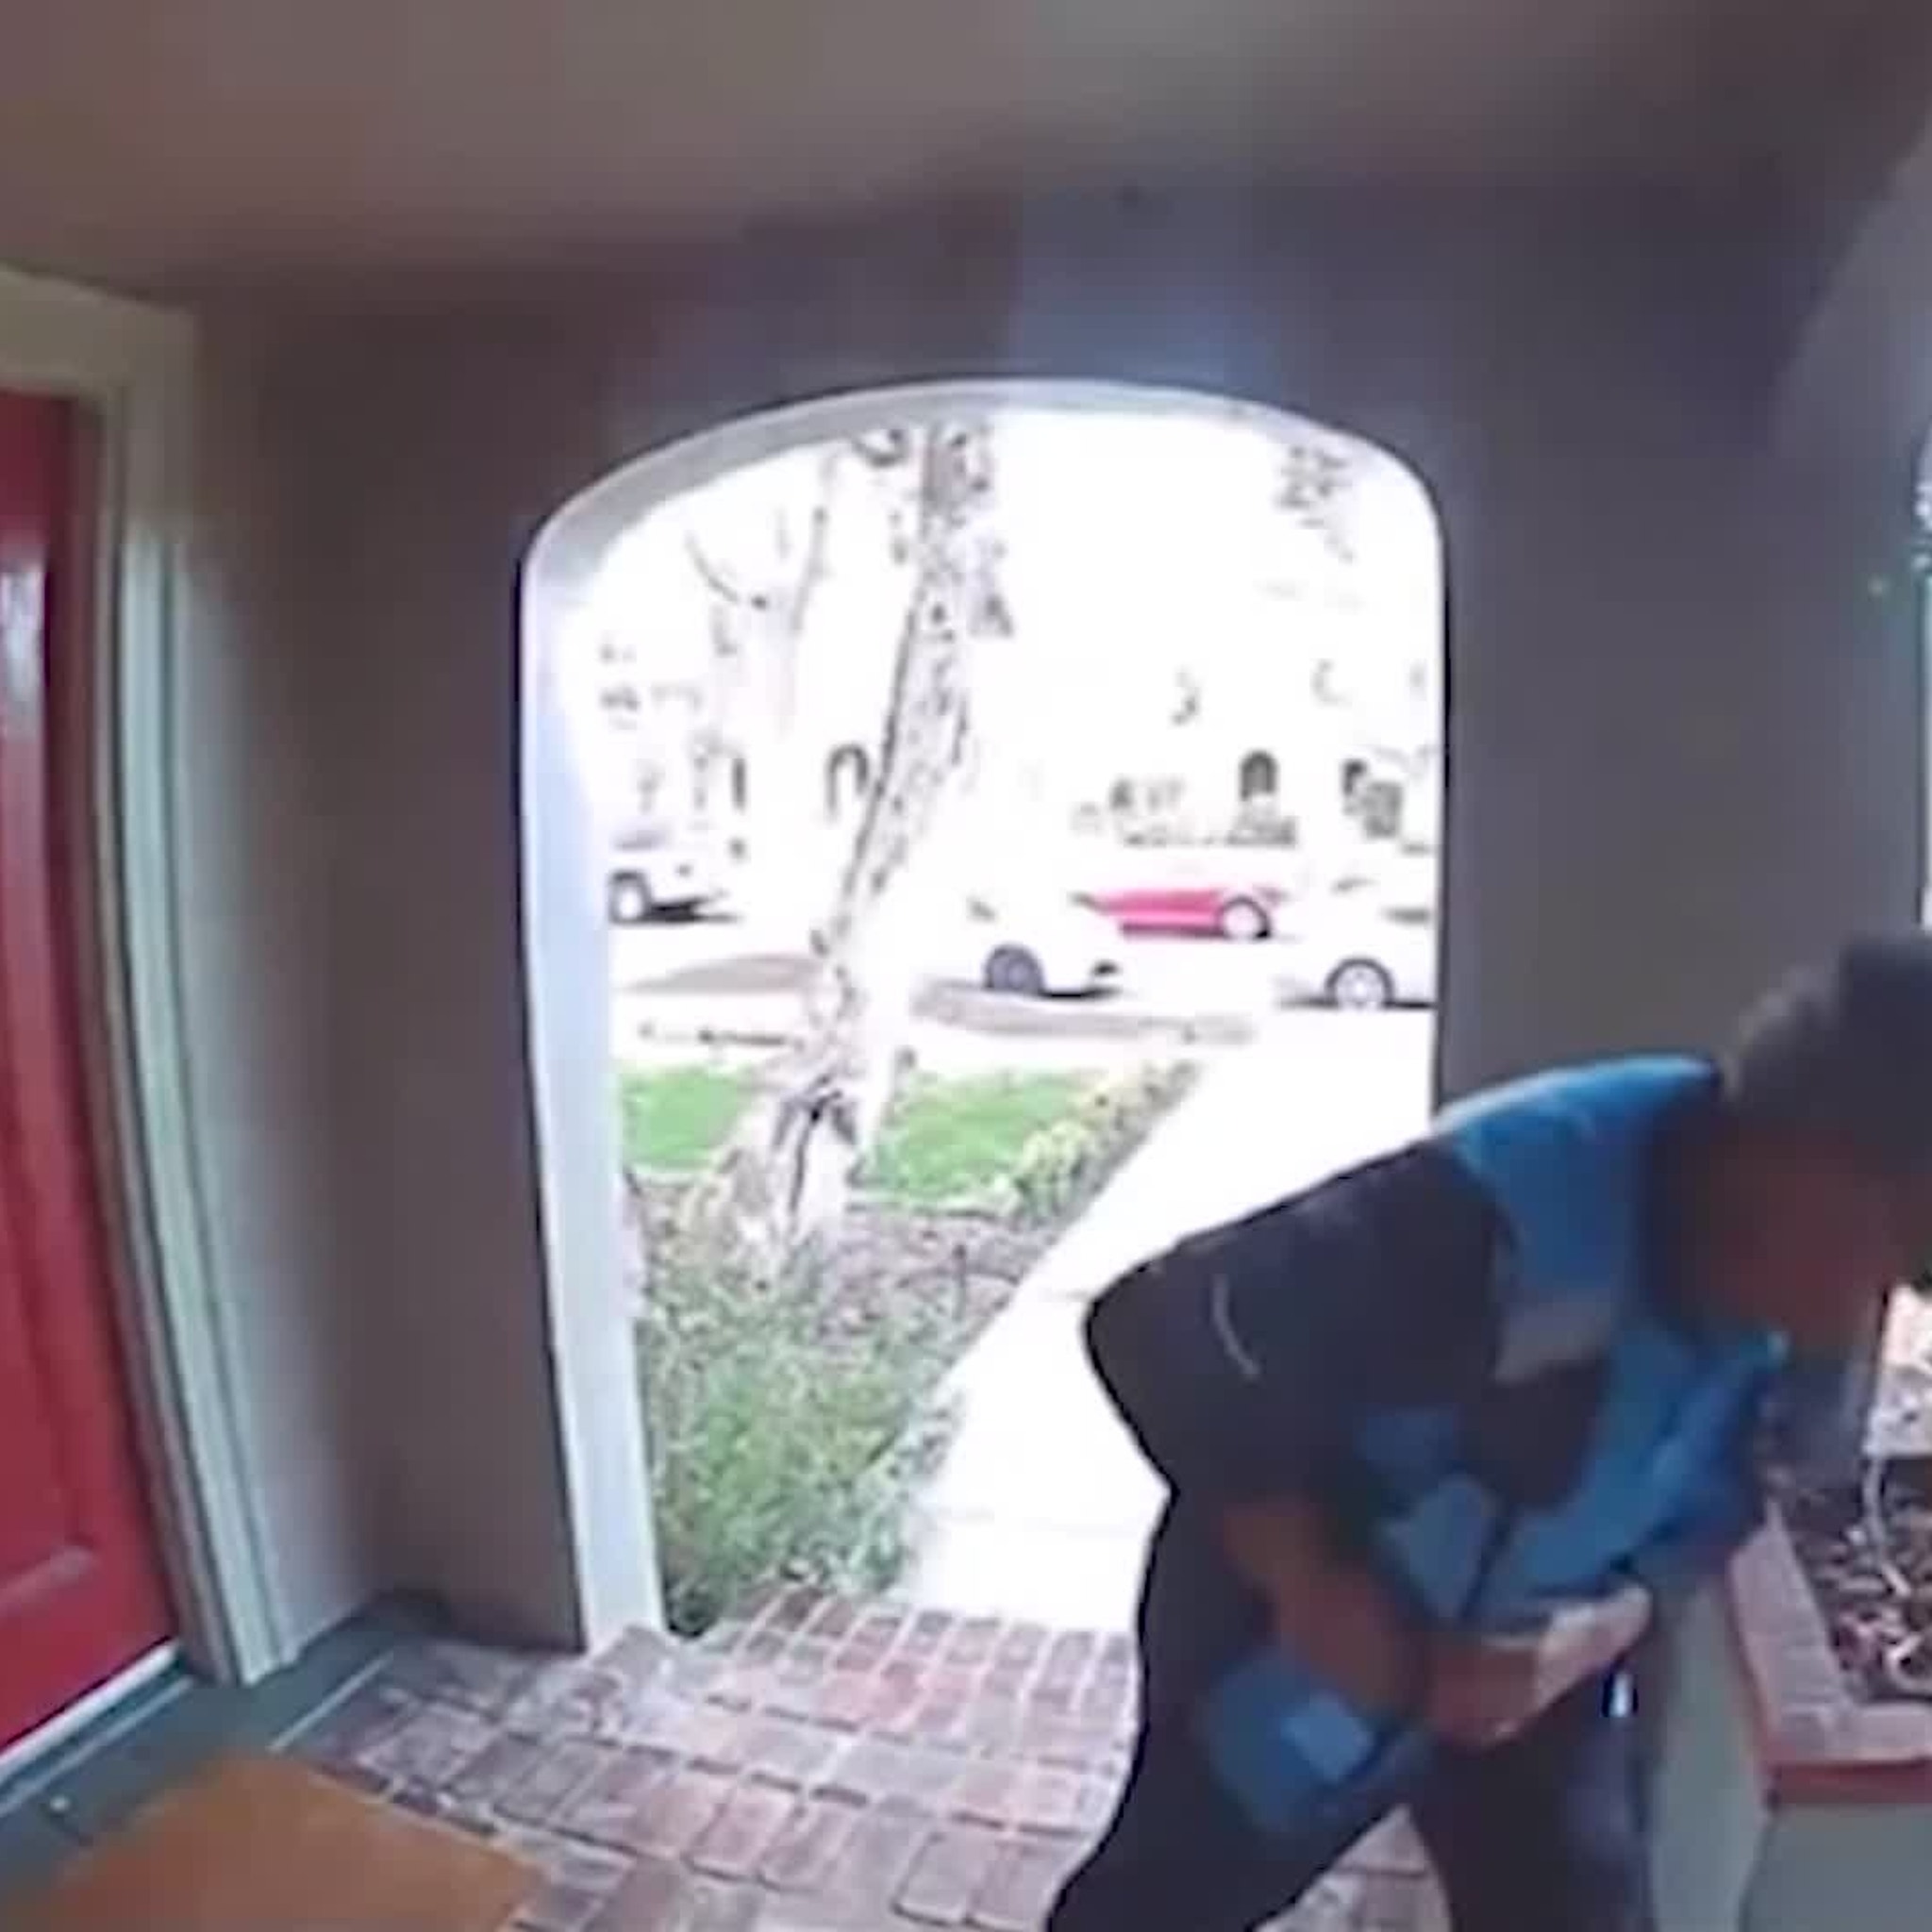 Amazon Delivery Driver Caught Peeing in Homeowner's Driveway